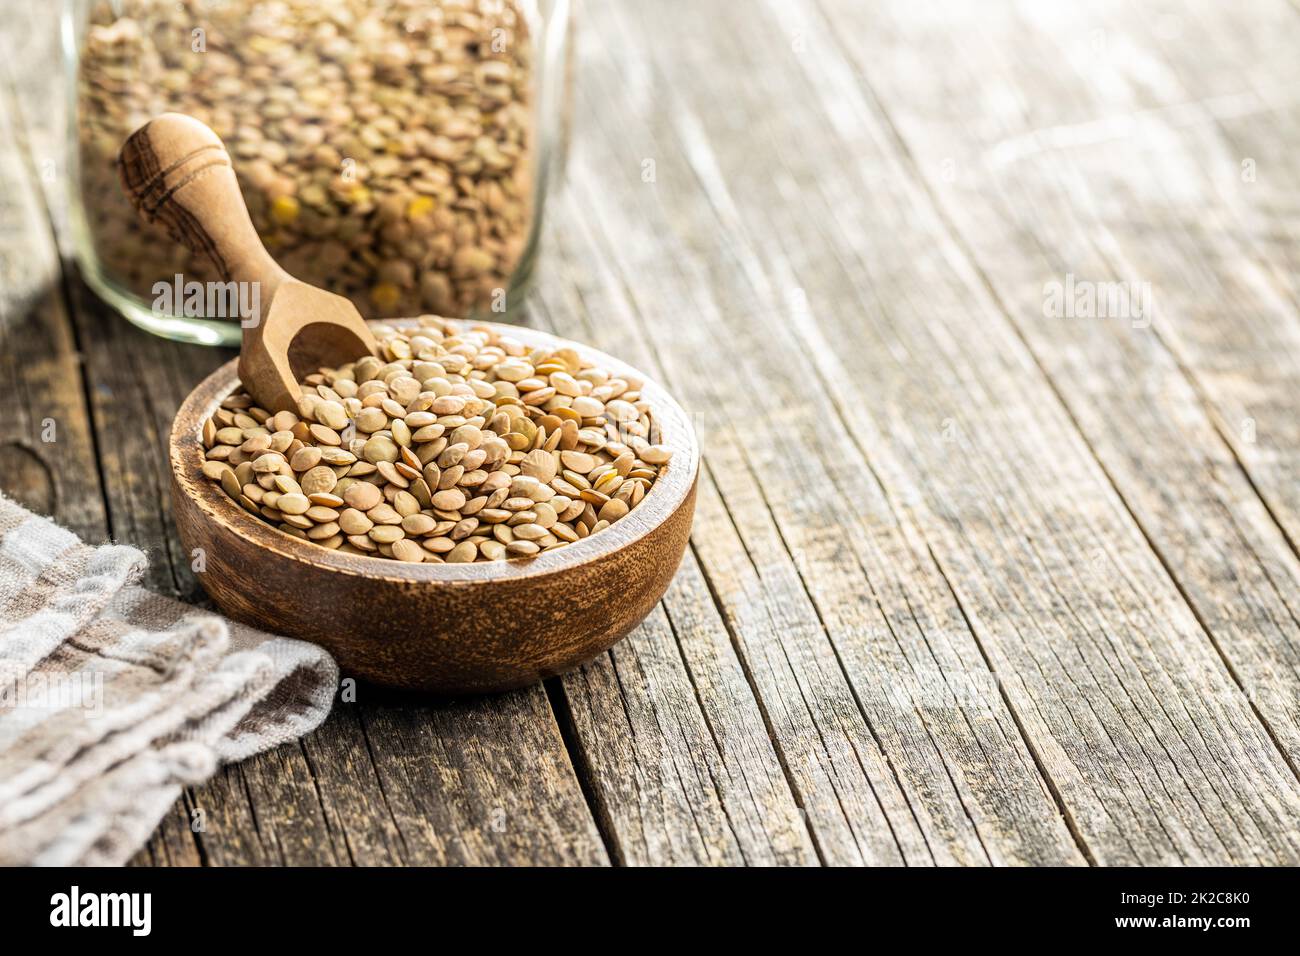 Uncooked brown lentils. Raw legume in bowl on wooden table. Stock Photo